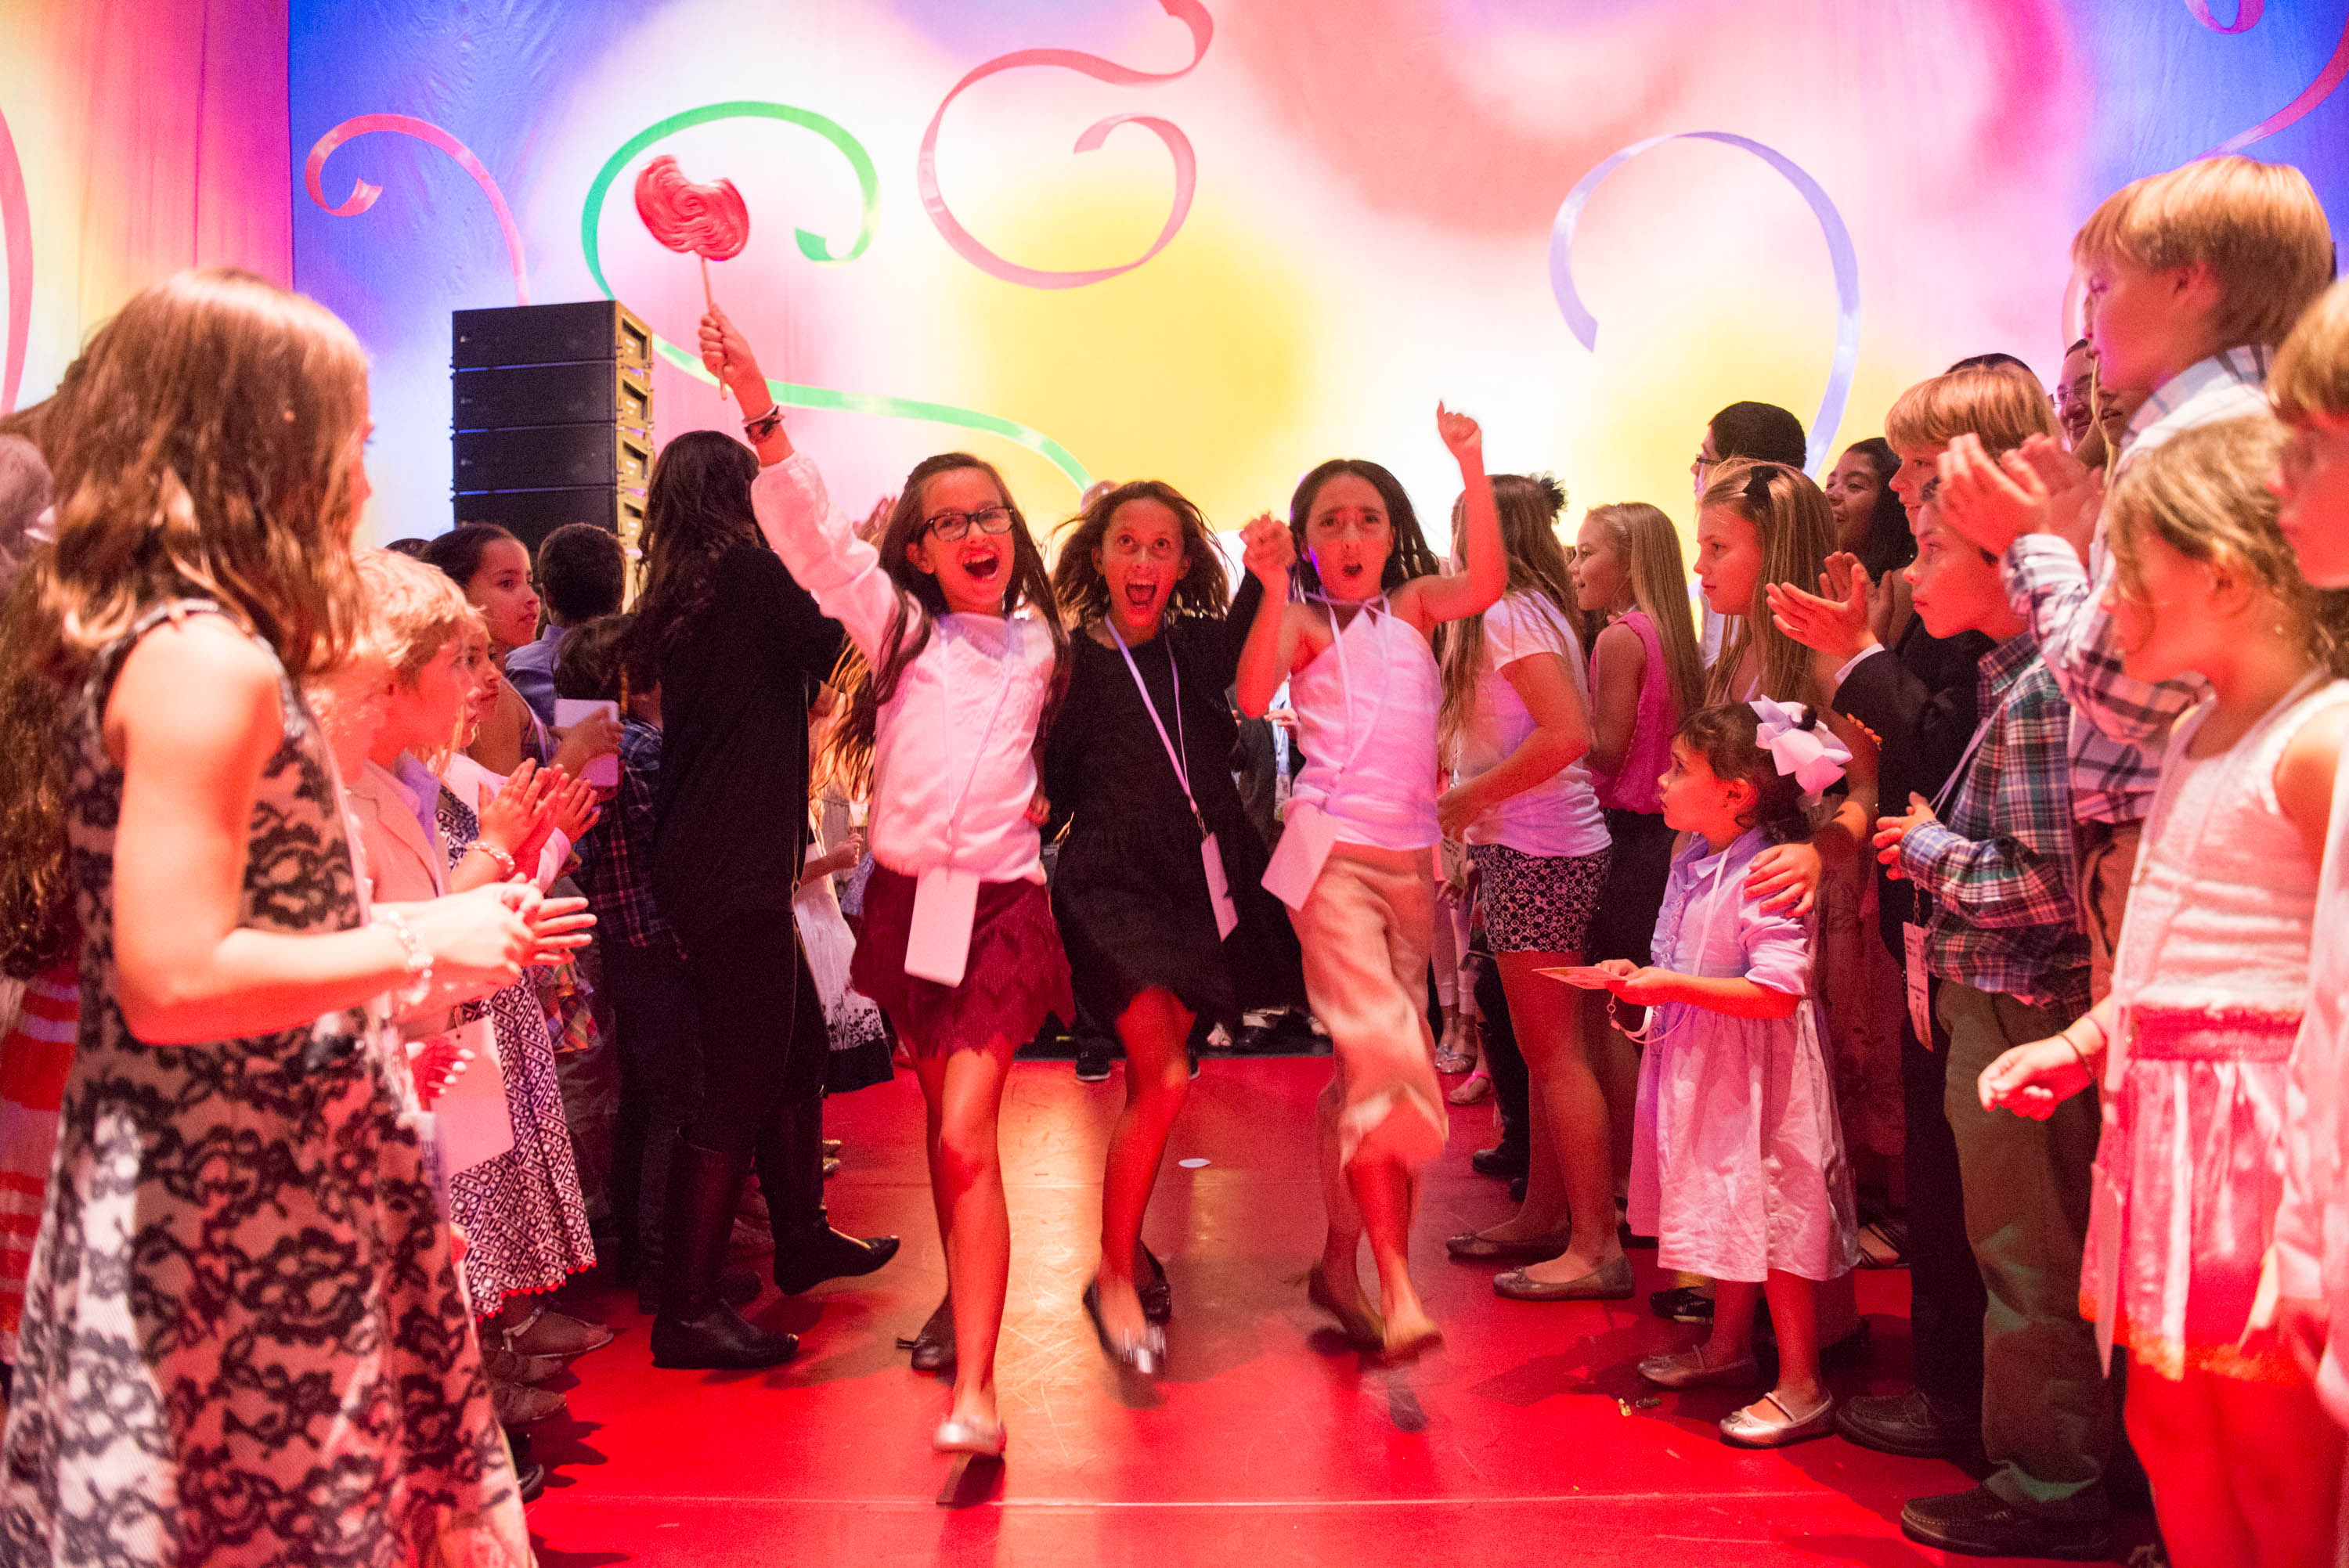 It's the Soul Train! Kids party on the stage of the Ziff Ballet Opera House at the Arsht Families Imagination Ball - photo by justin namon